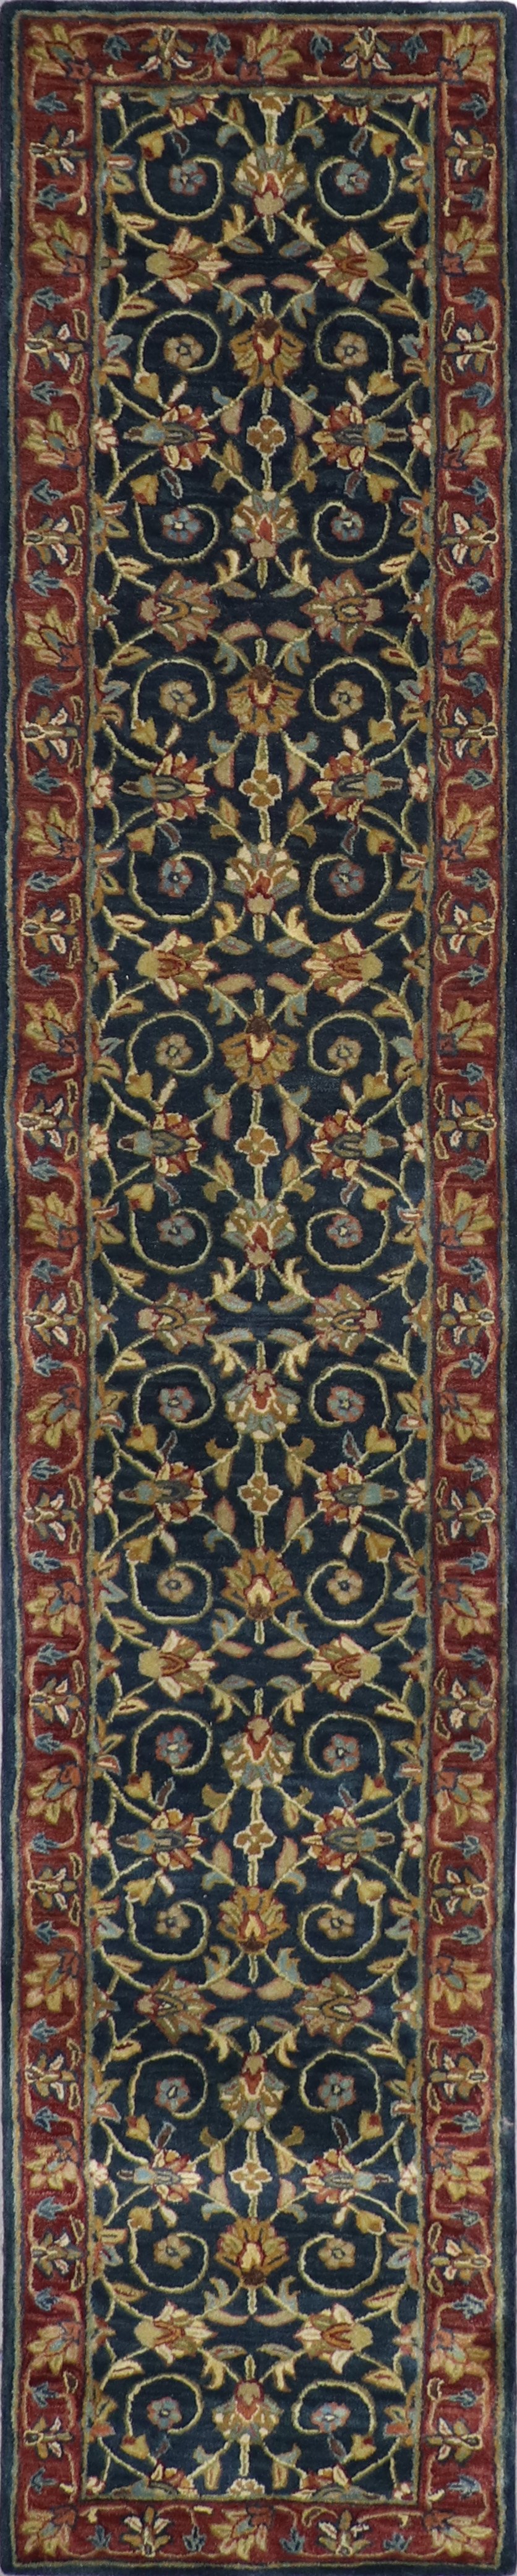 2'3"x11'10" Decorative Wool Hand-Tufted Rug - Direct Rug Import | Rugs in Chicago, Indiana,South Bend,Granger